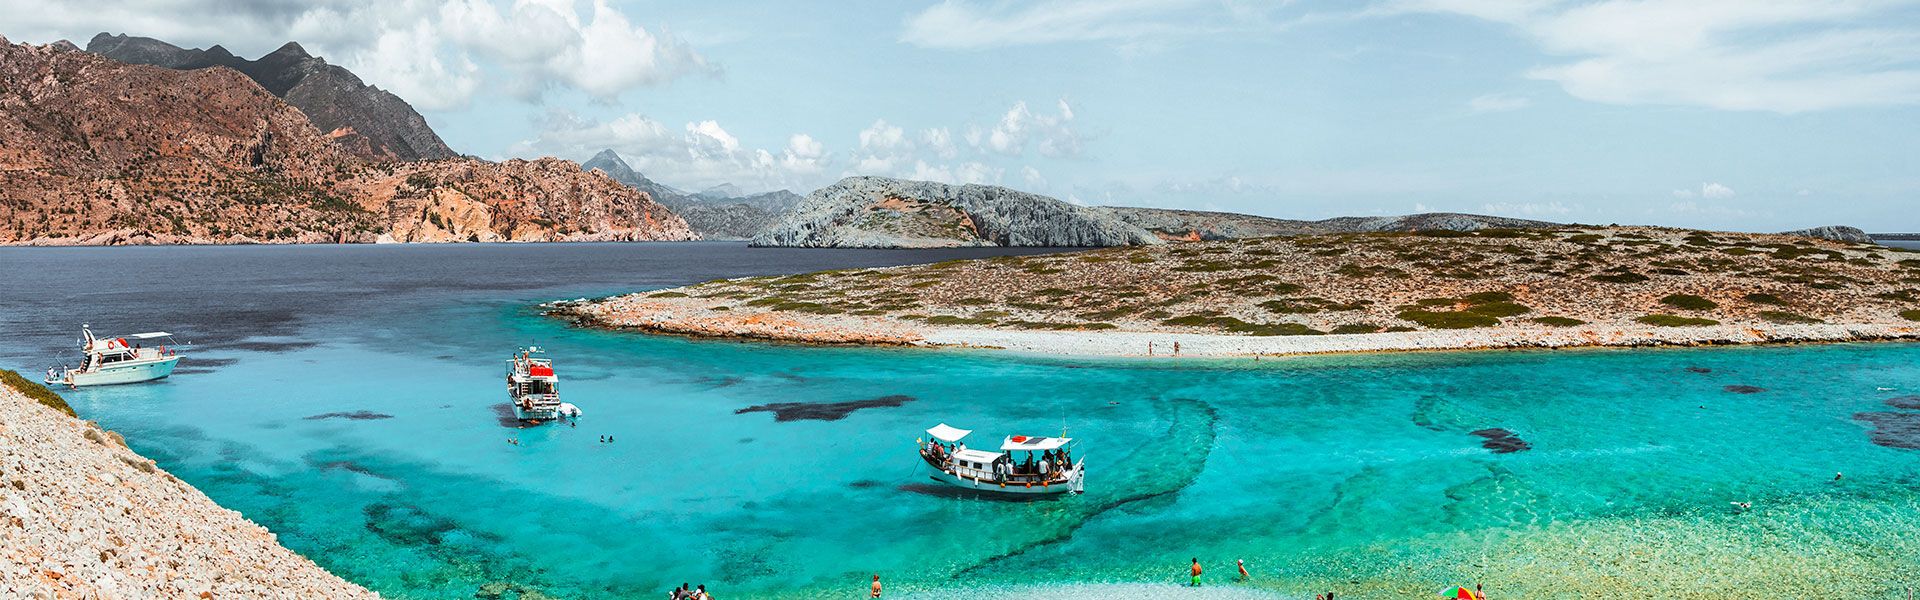 Koutsomytis beach, the most beautiful in Astypalaia, Dodecanese